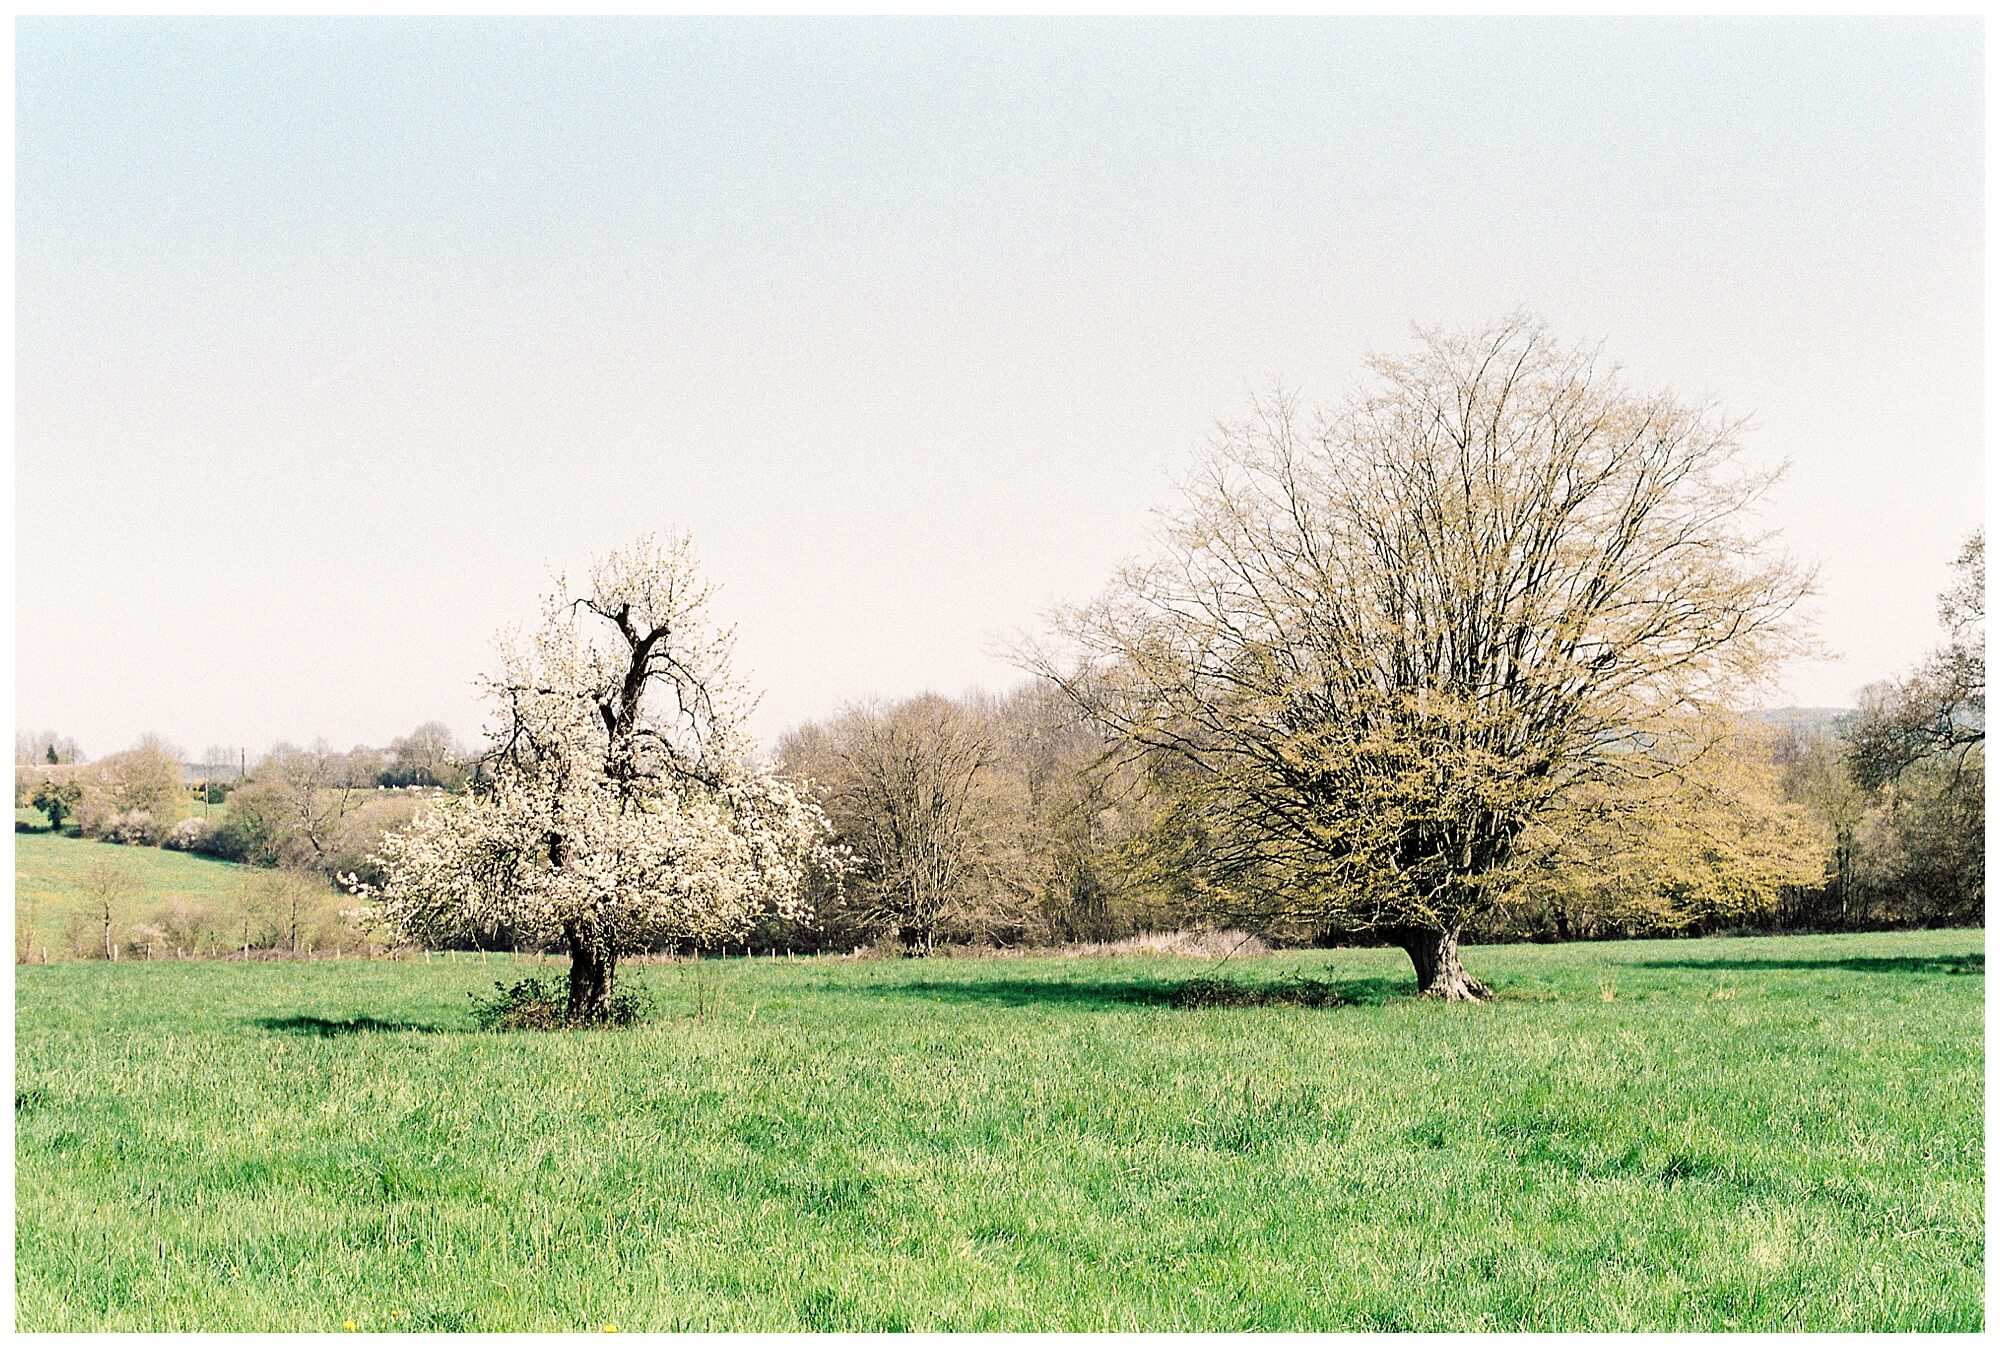 A flowering pear tree stands next to a gently leafing willow tree in the French countryside.